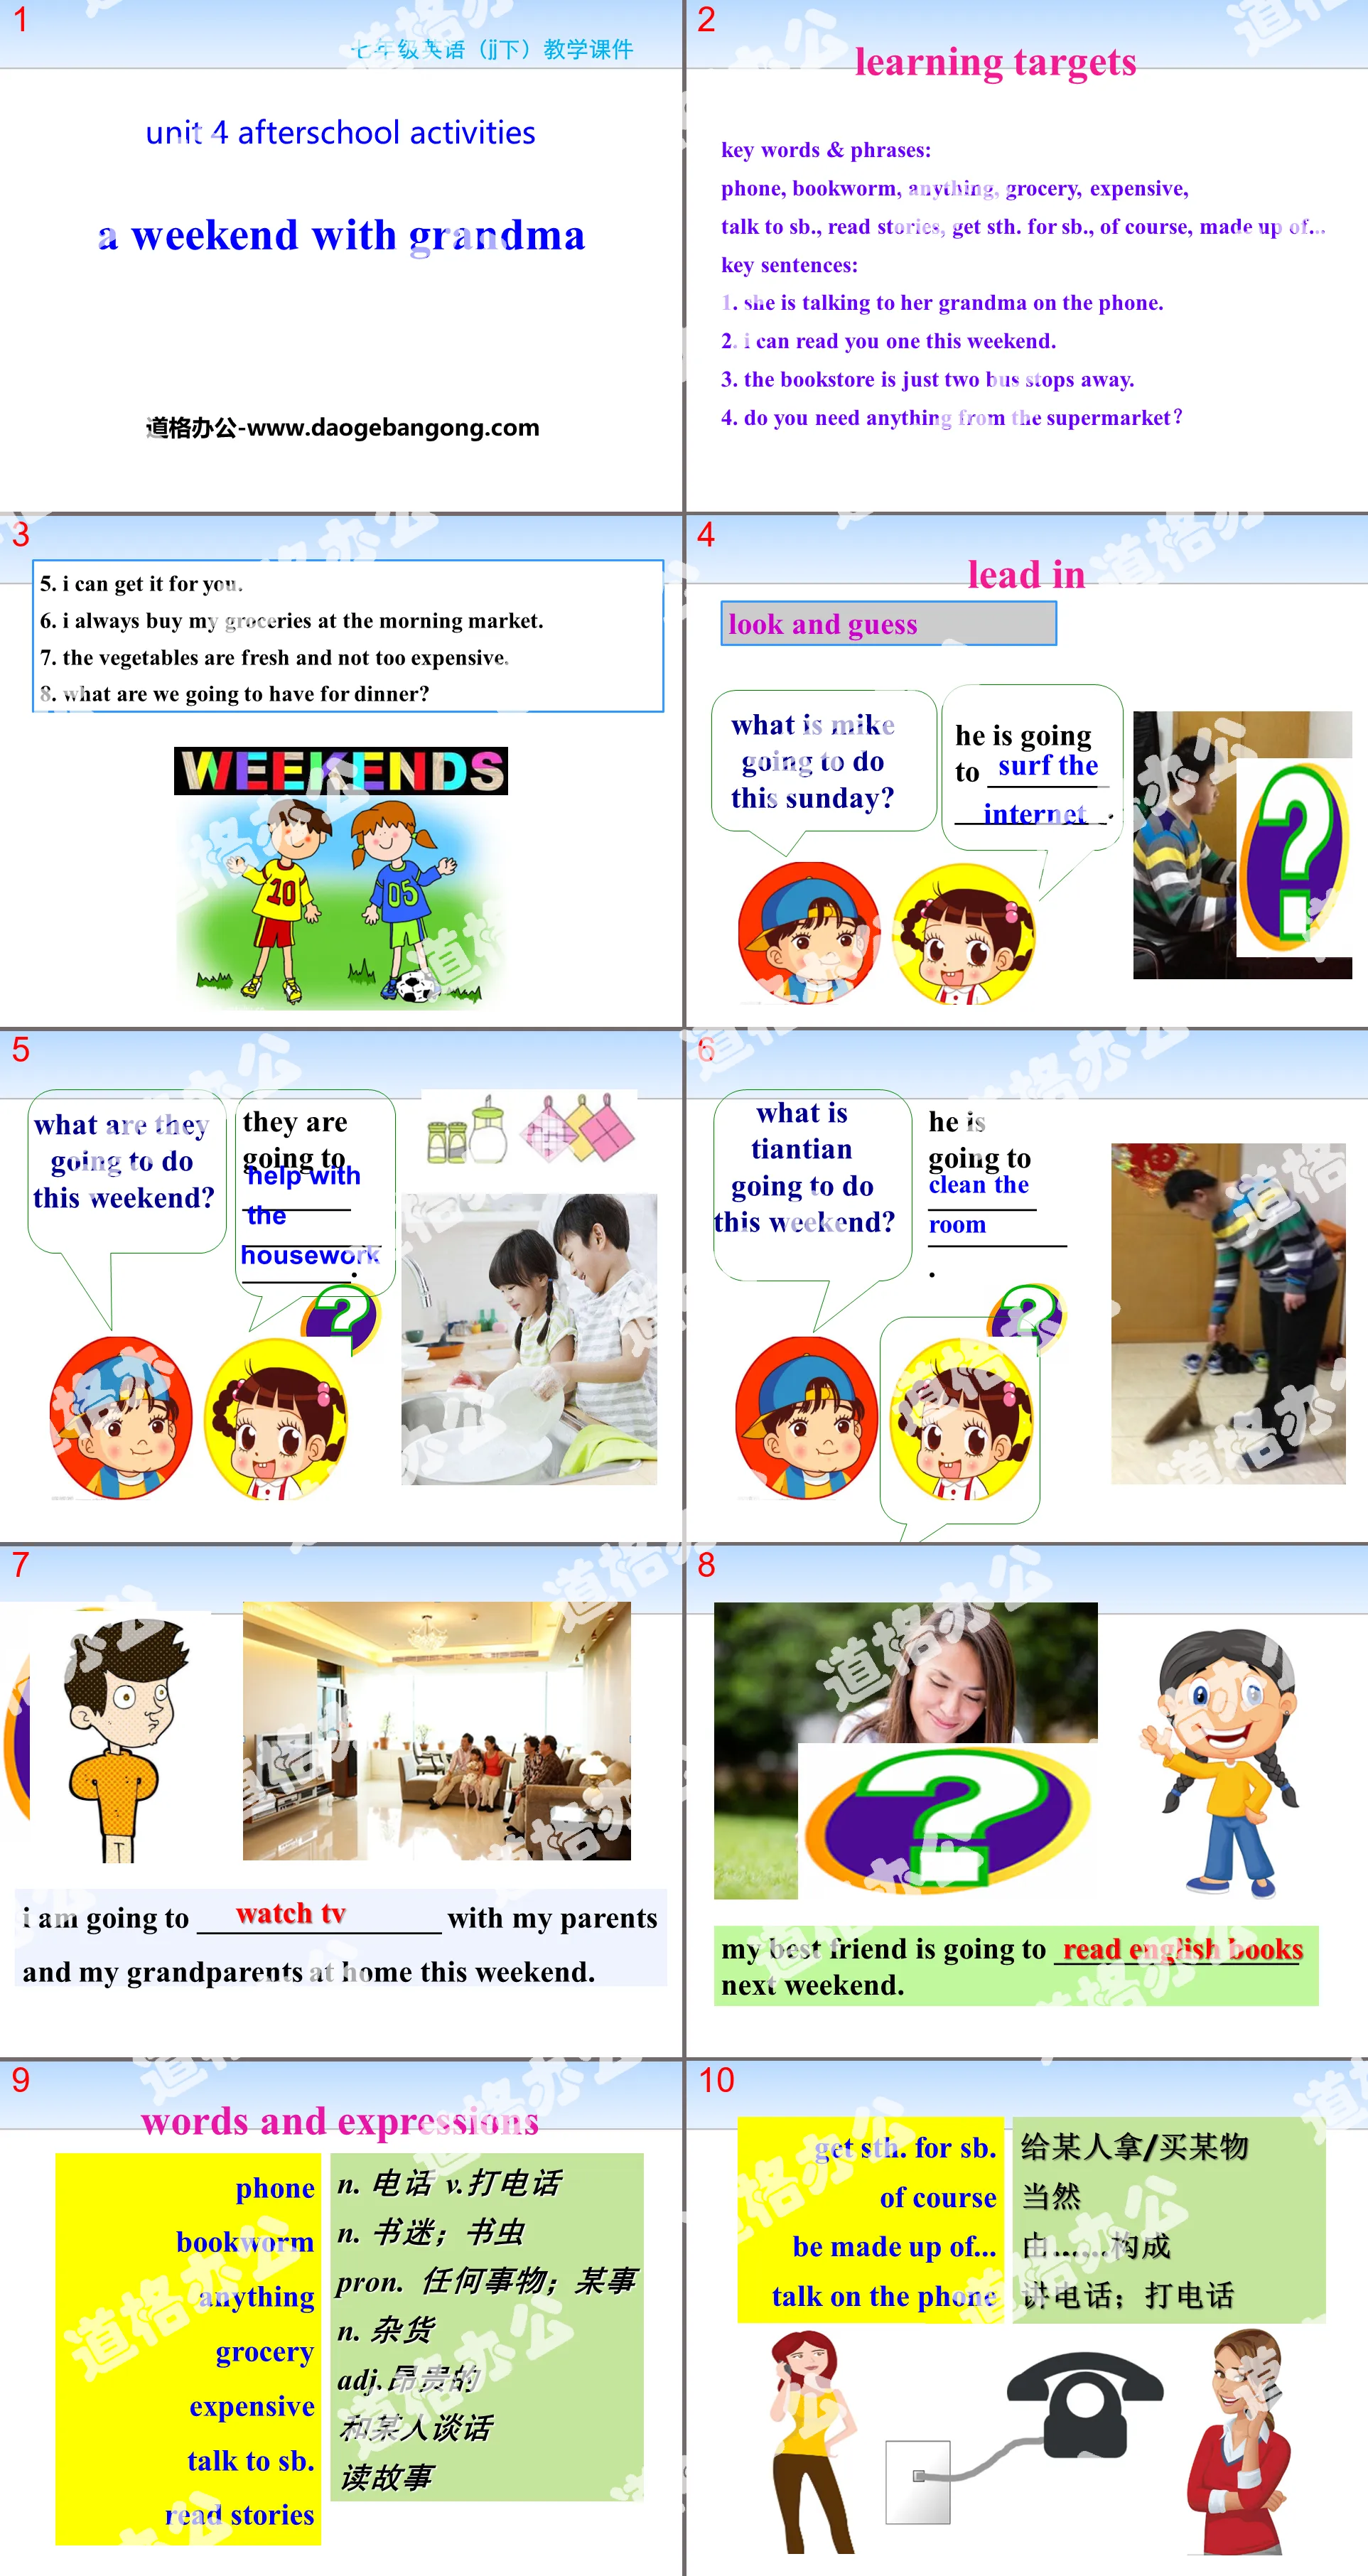 《A Weekend With Grandma》After-School Activities PPT免费课件
